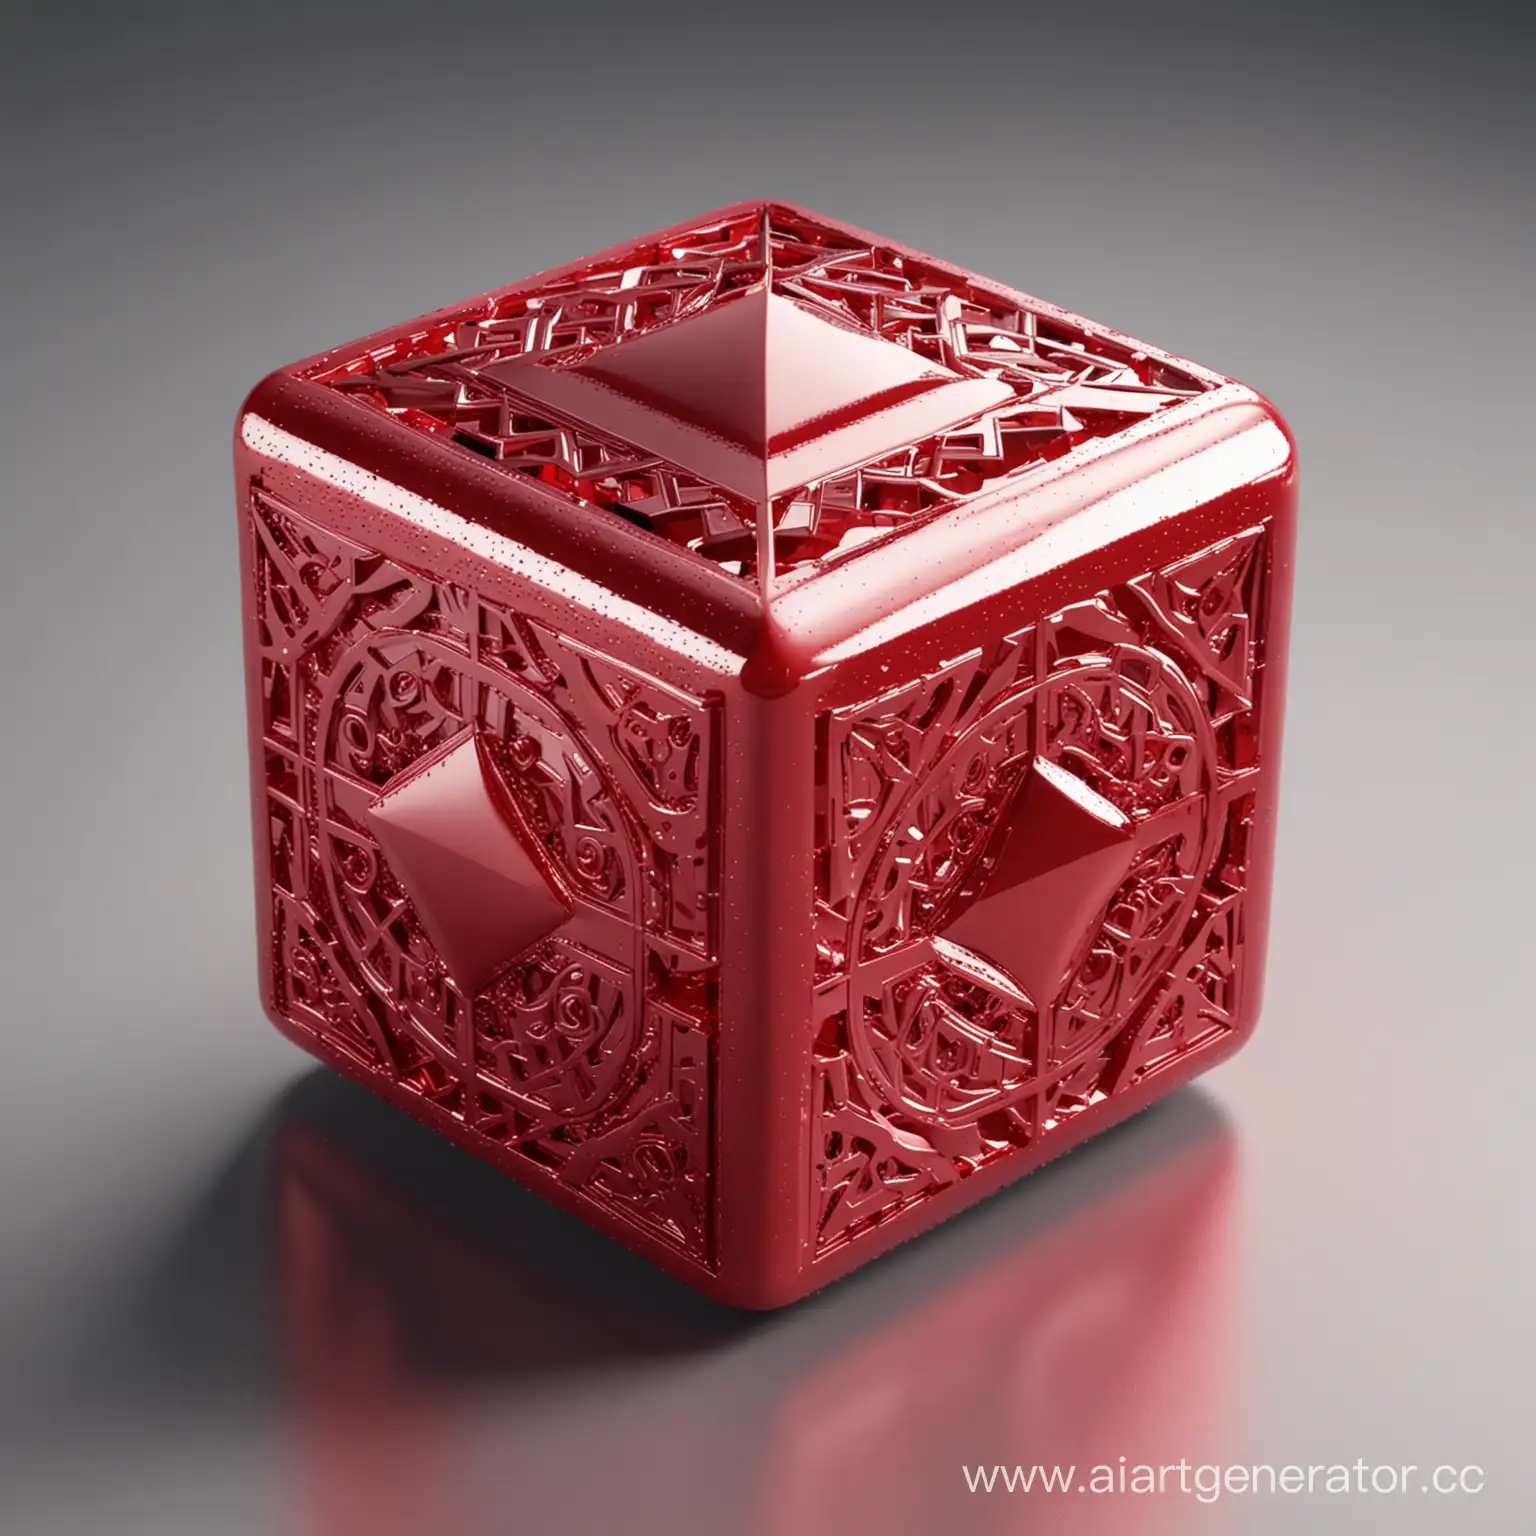 Shiny-Red-Metallic-Cube-with-Geometric-Ornaments